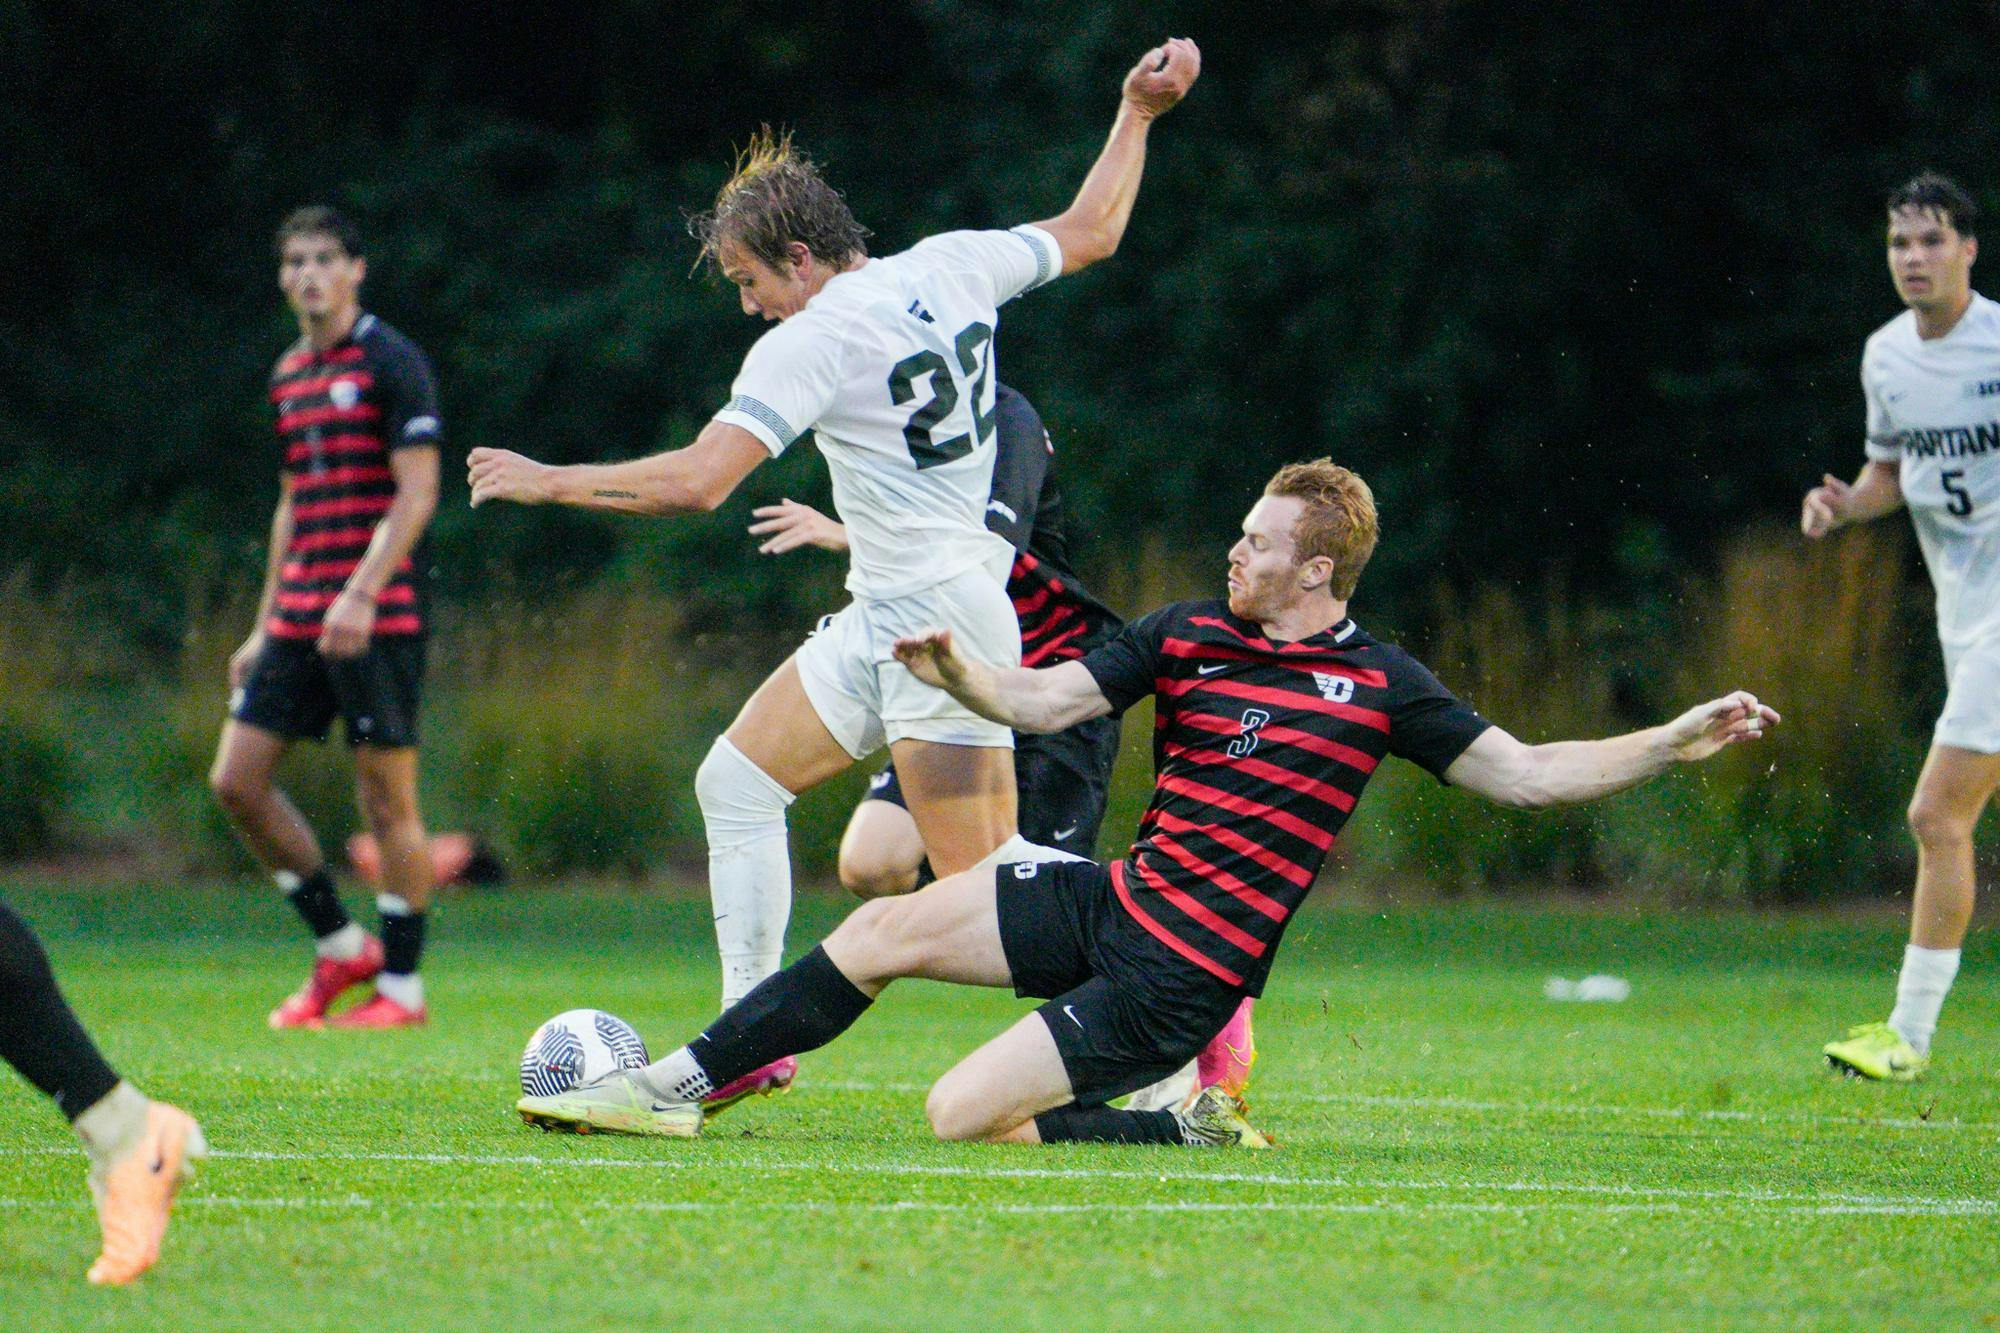 <p>Sophomore forward Jake Spadafora #22 is tackled by a University of Dayton player during a game at DeMartin Soccer Complex on Sept. 7, 2023.</p>